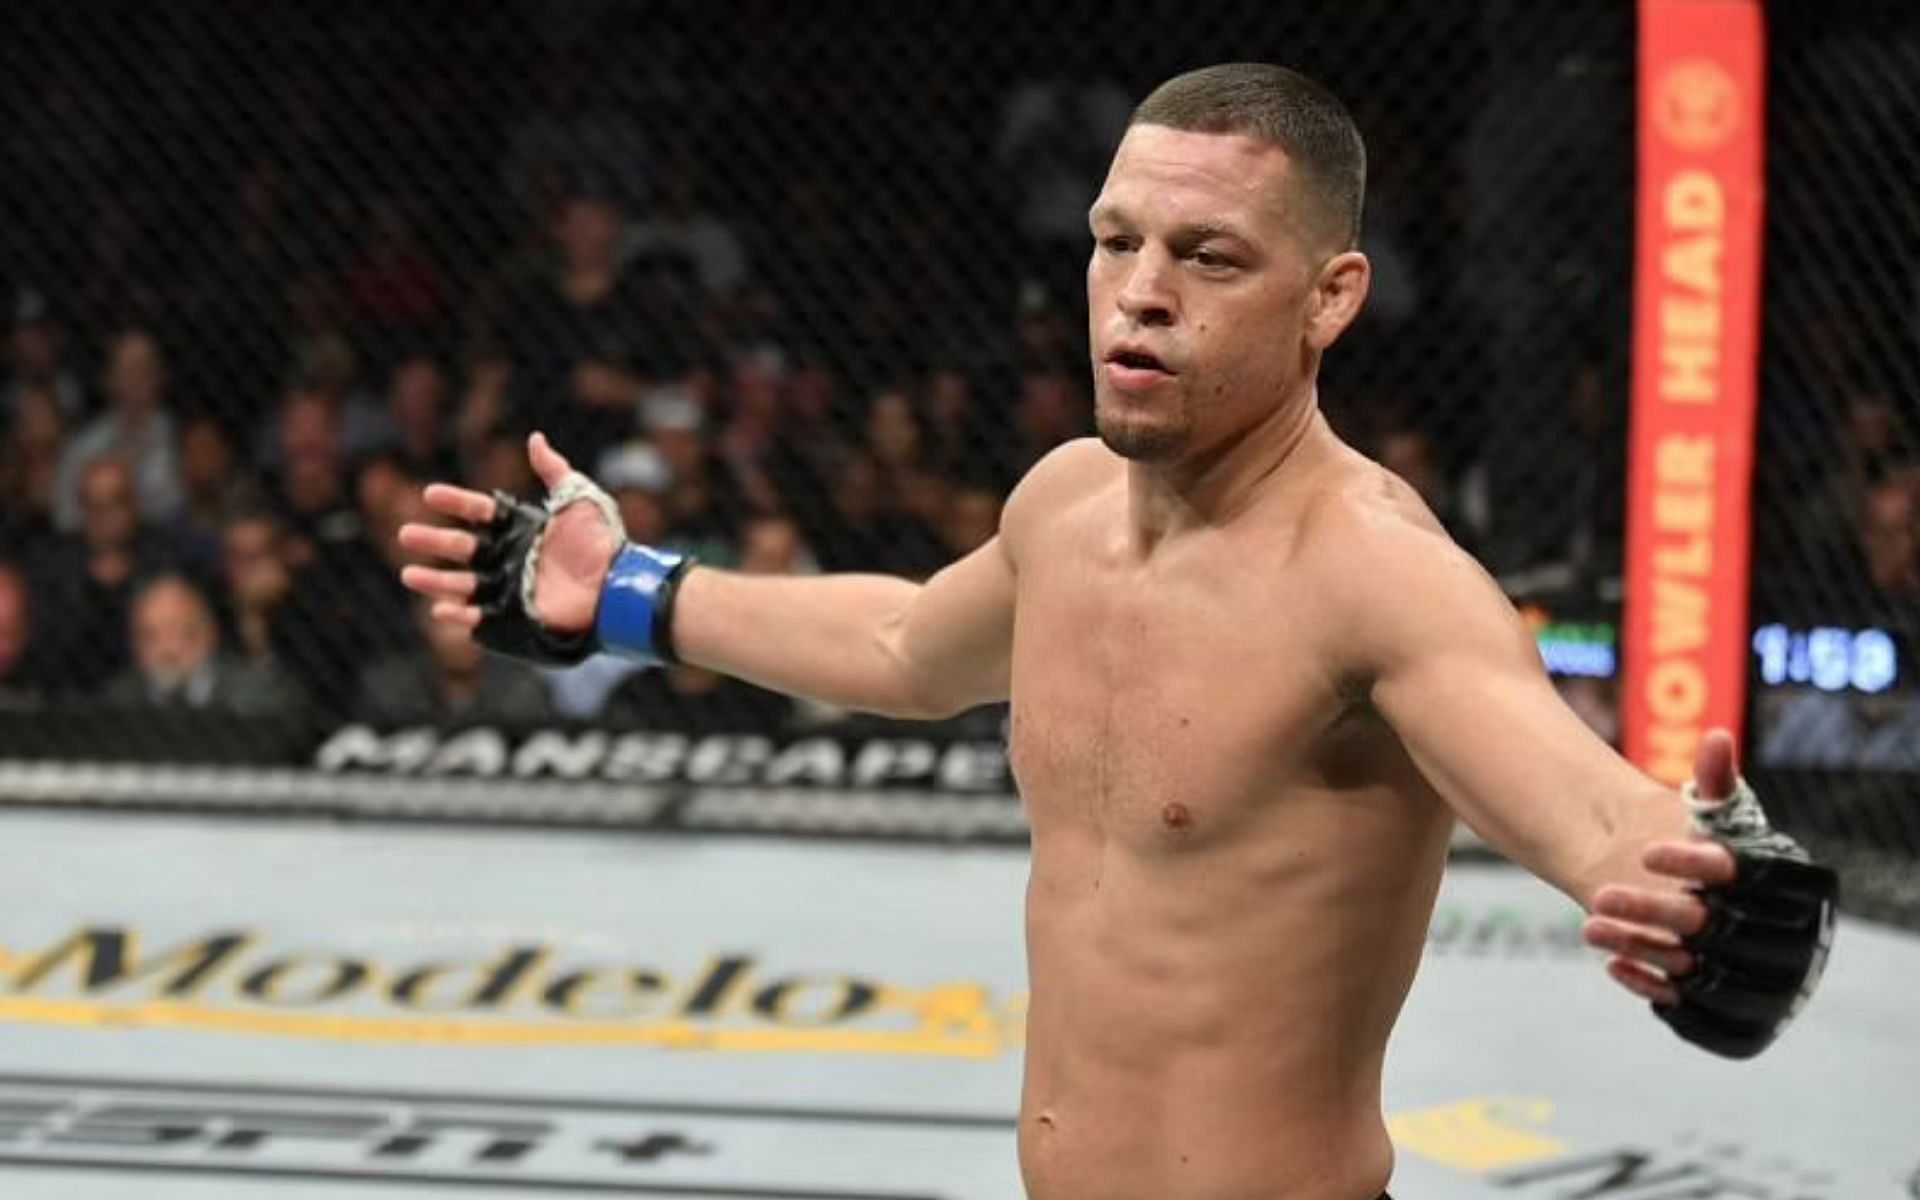 Nate Diaz has just one fight remaining on his UFC contract